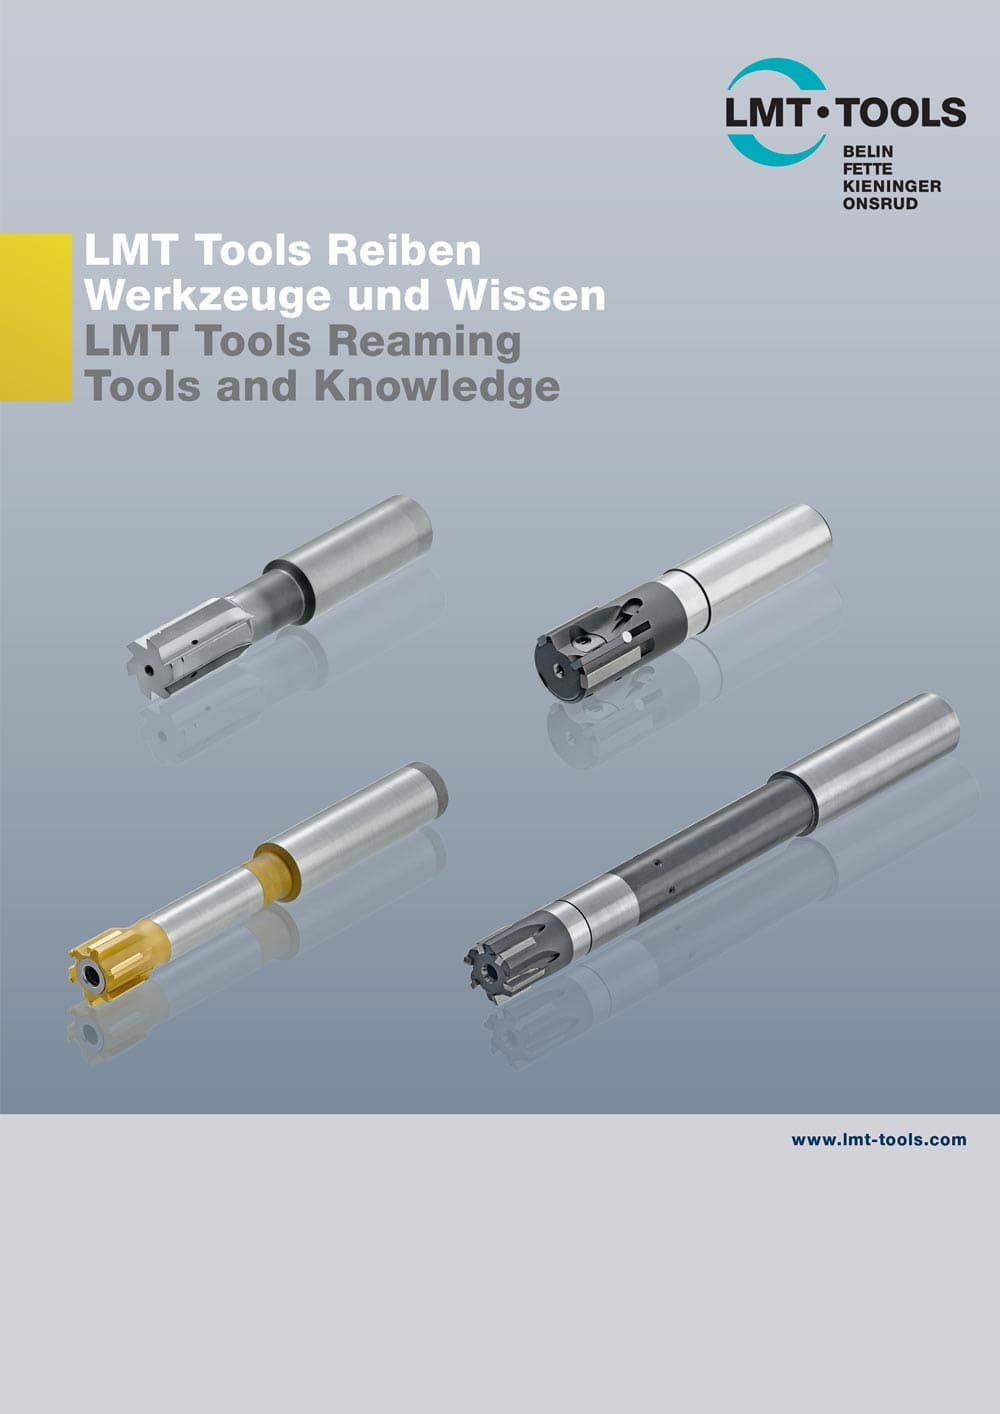 LMT Tools Reaming Tools and Knowledge